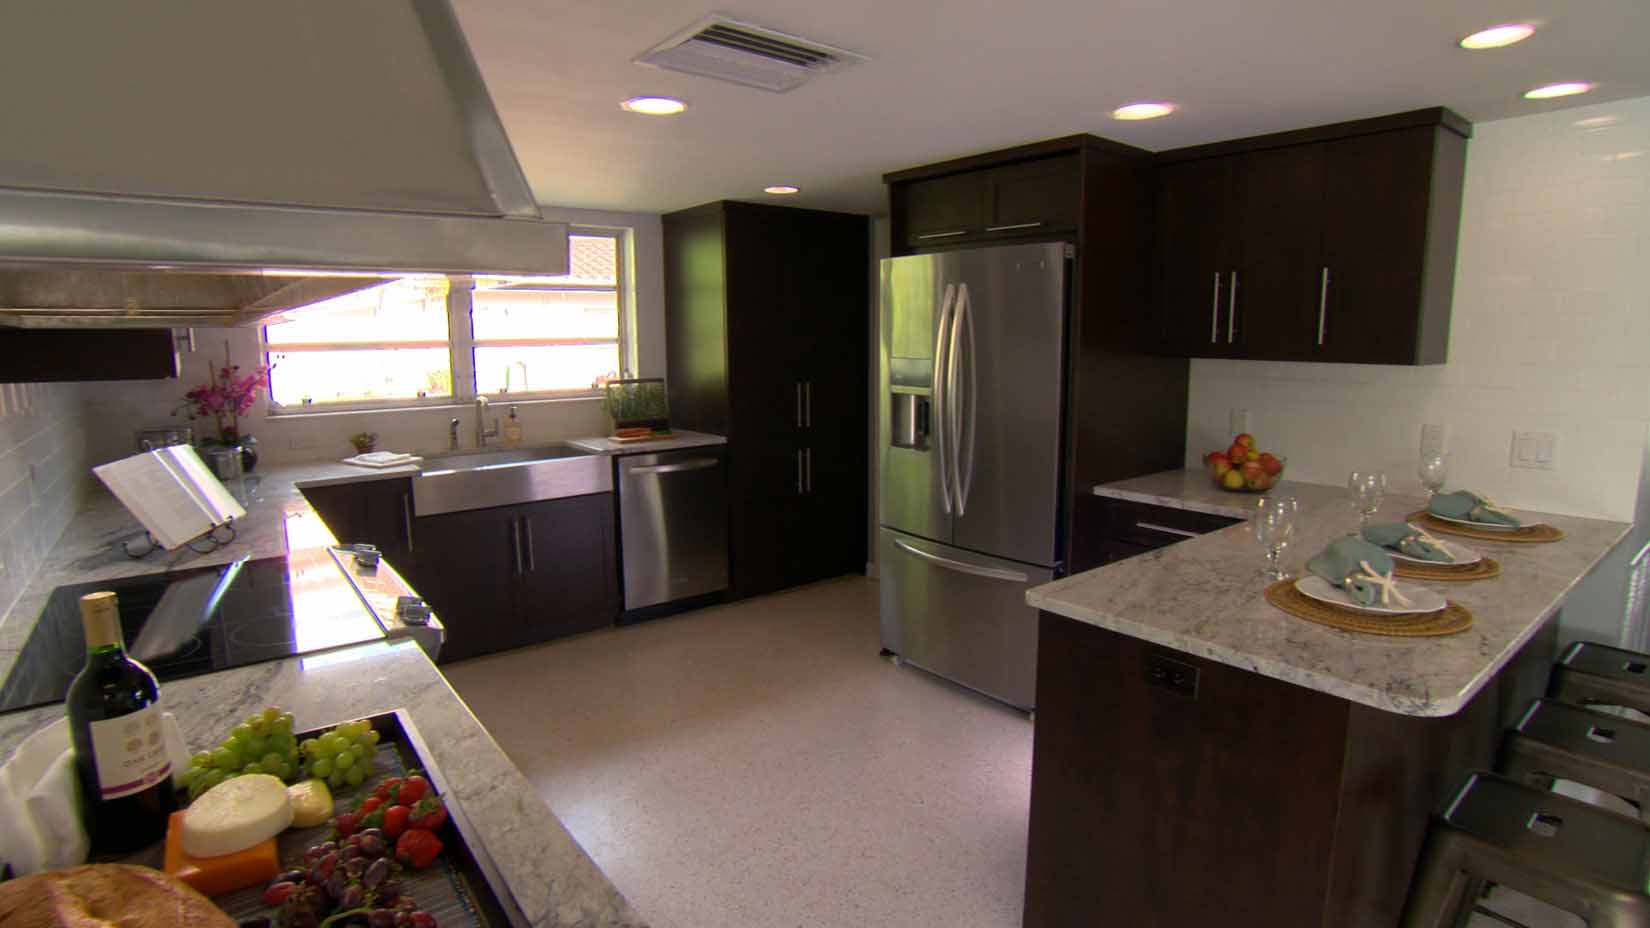 A newly renovated kitchen area